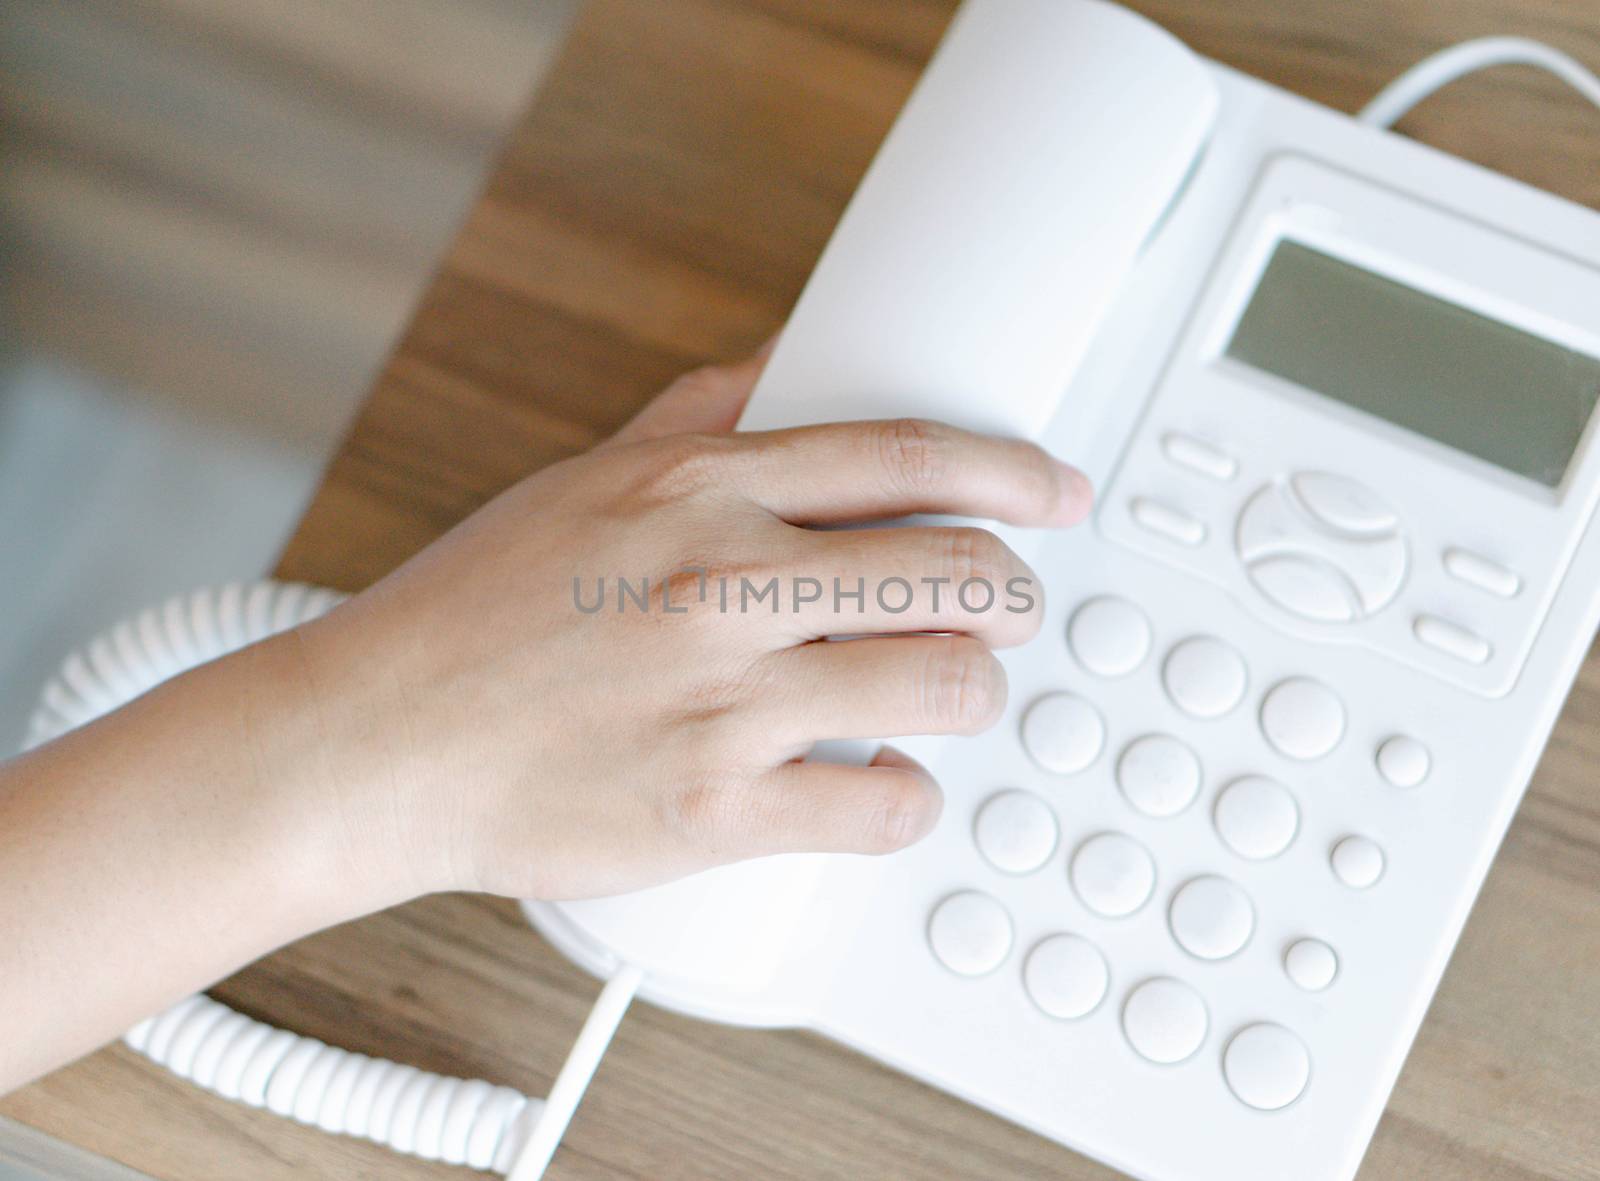 Closeup woman hand holding telephone receiver and dialing a phone number on white landline telephone.